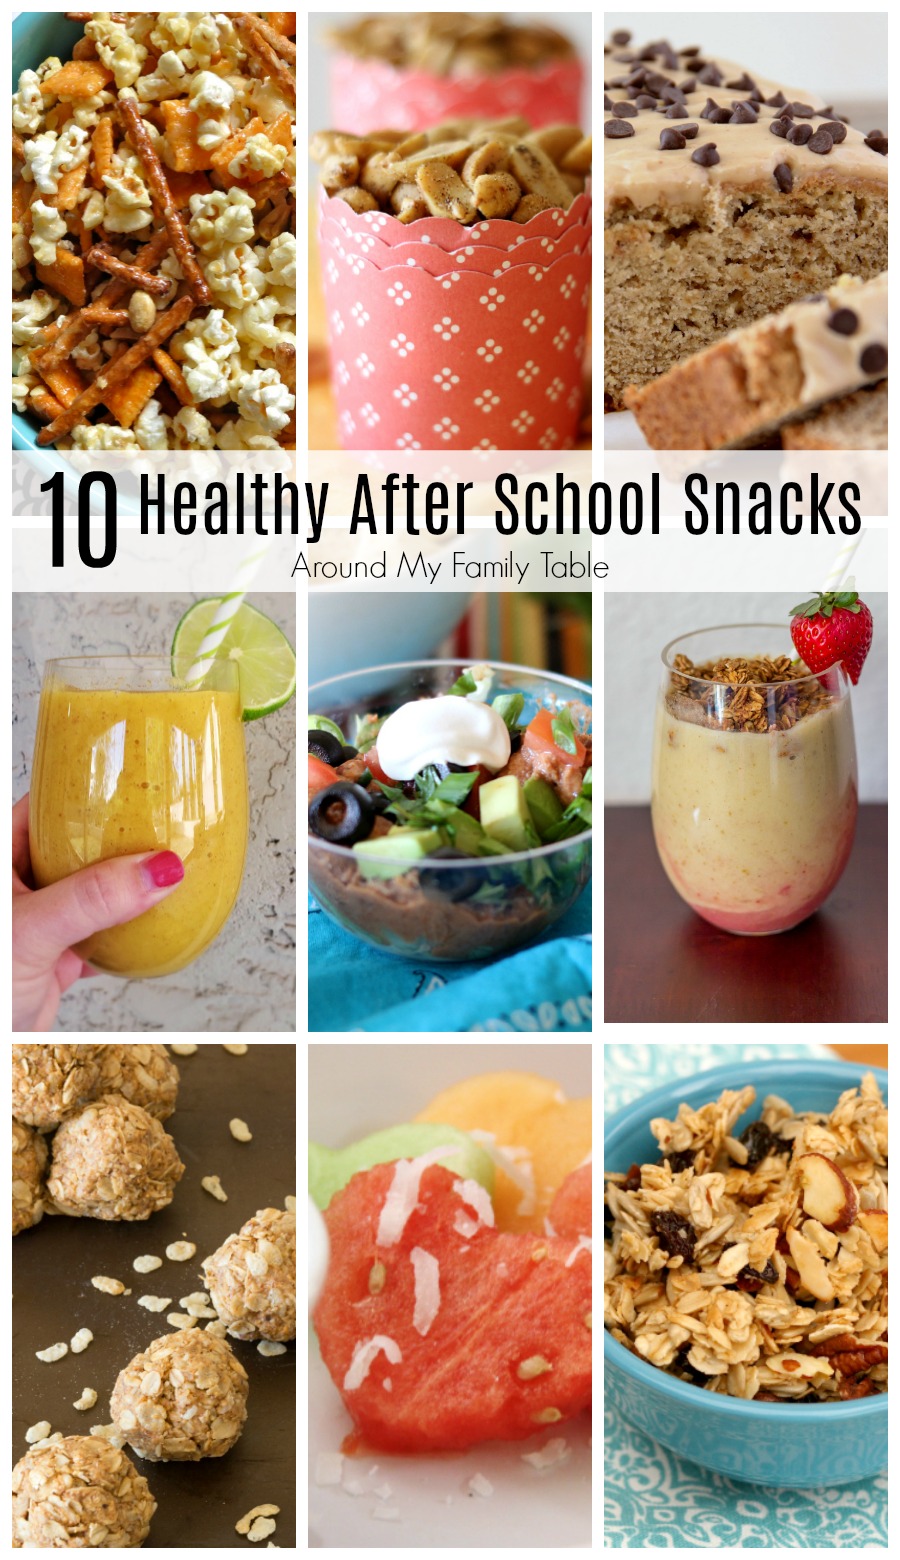 10 Healthy After School Snacks you can feel good about giving your kids!